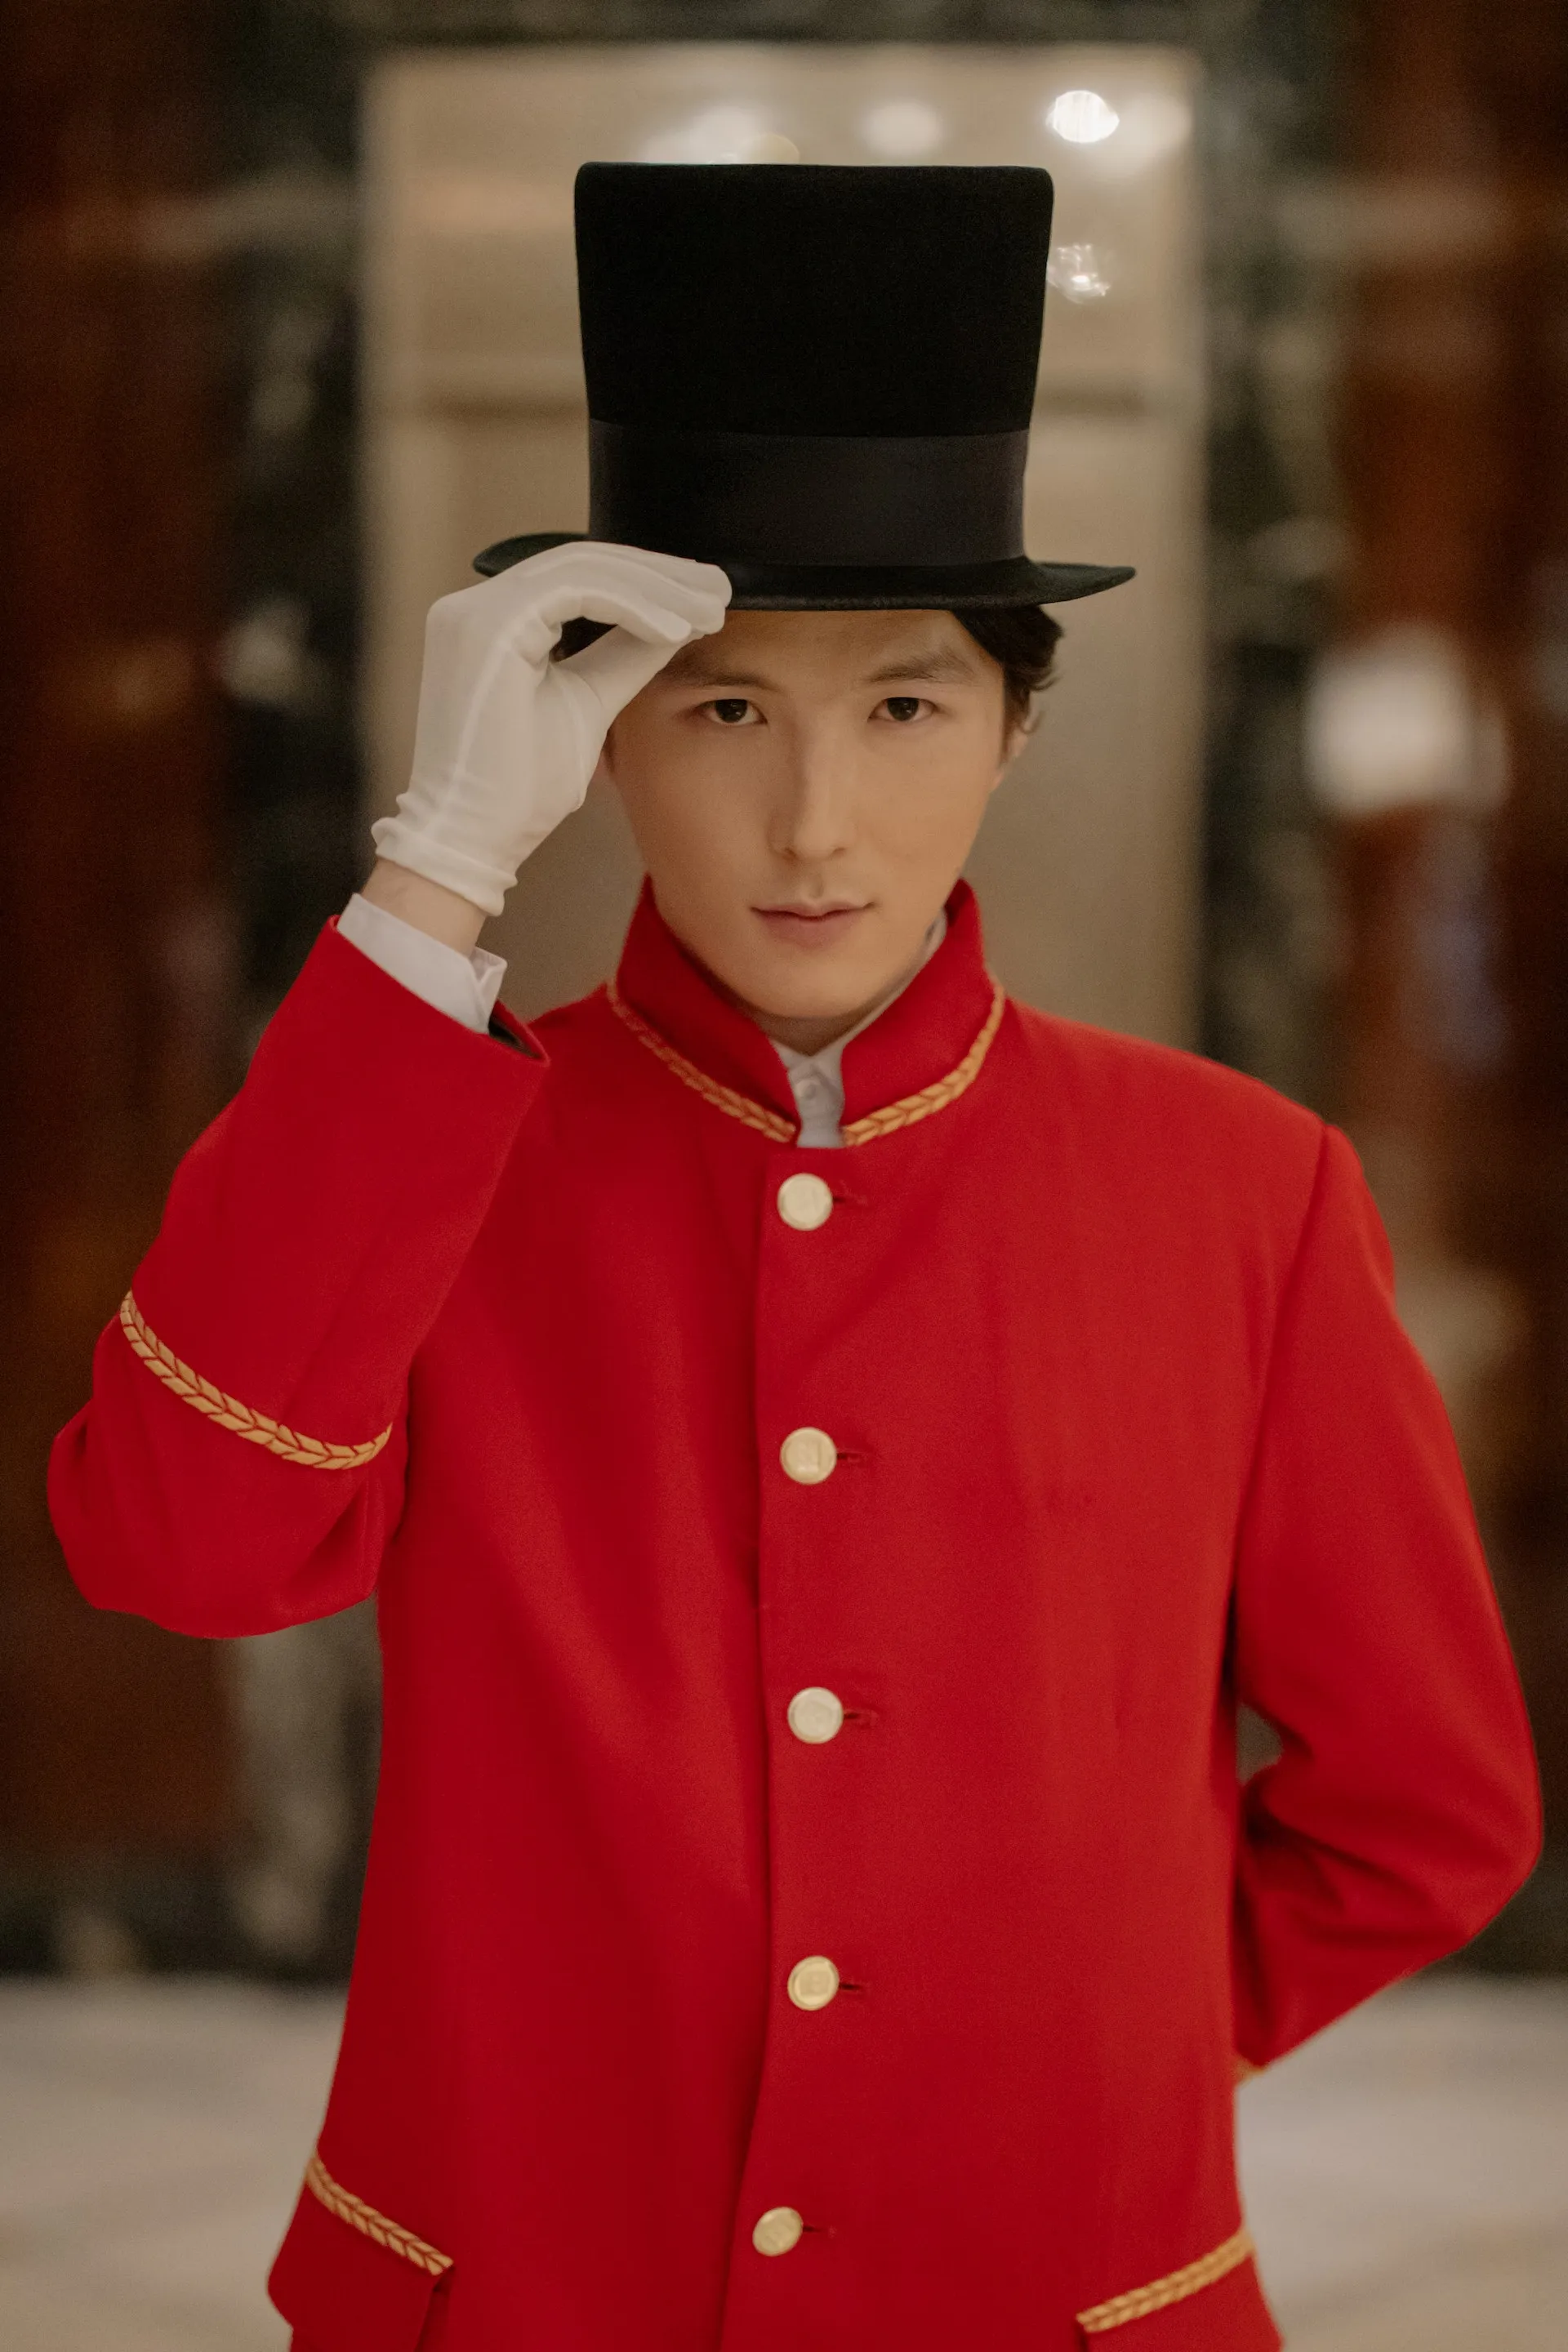 Concierge wearing a black top hat and red coat